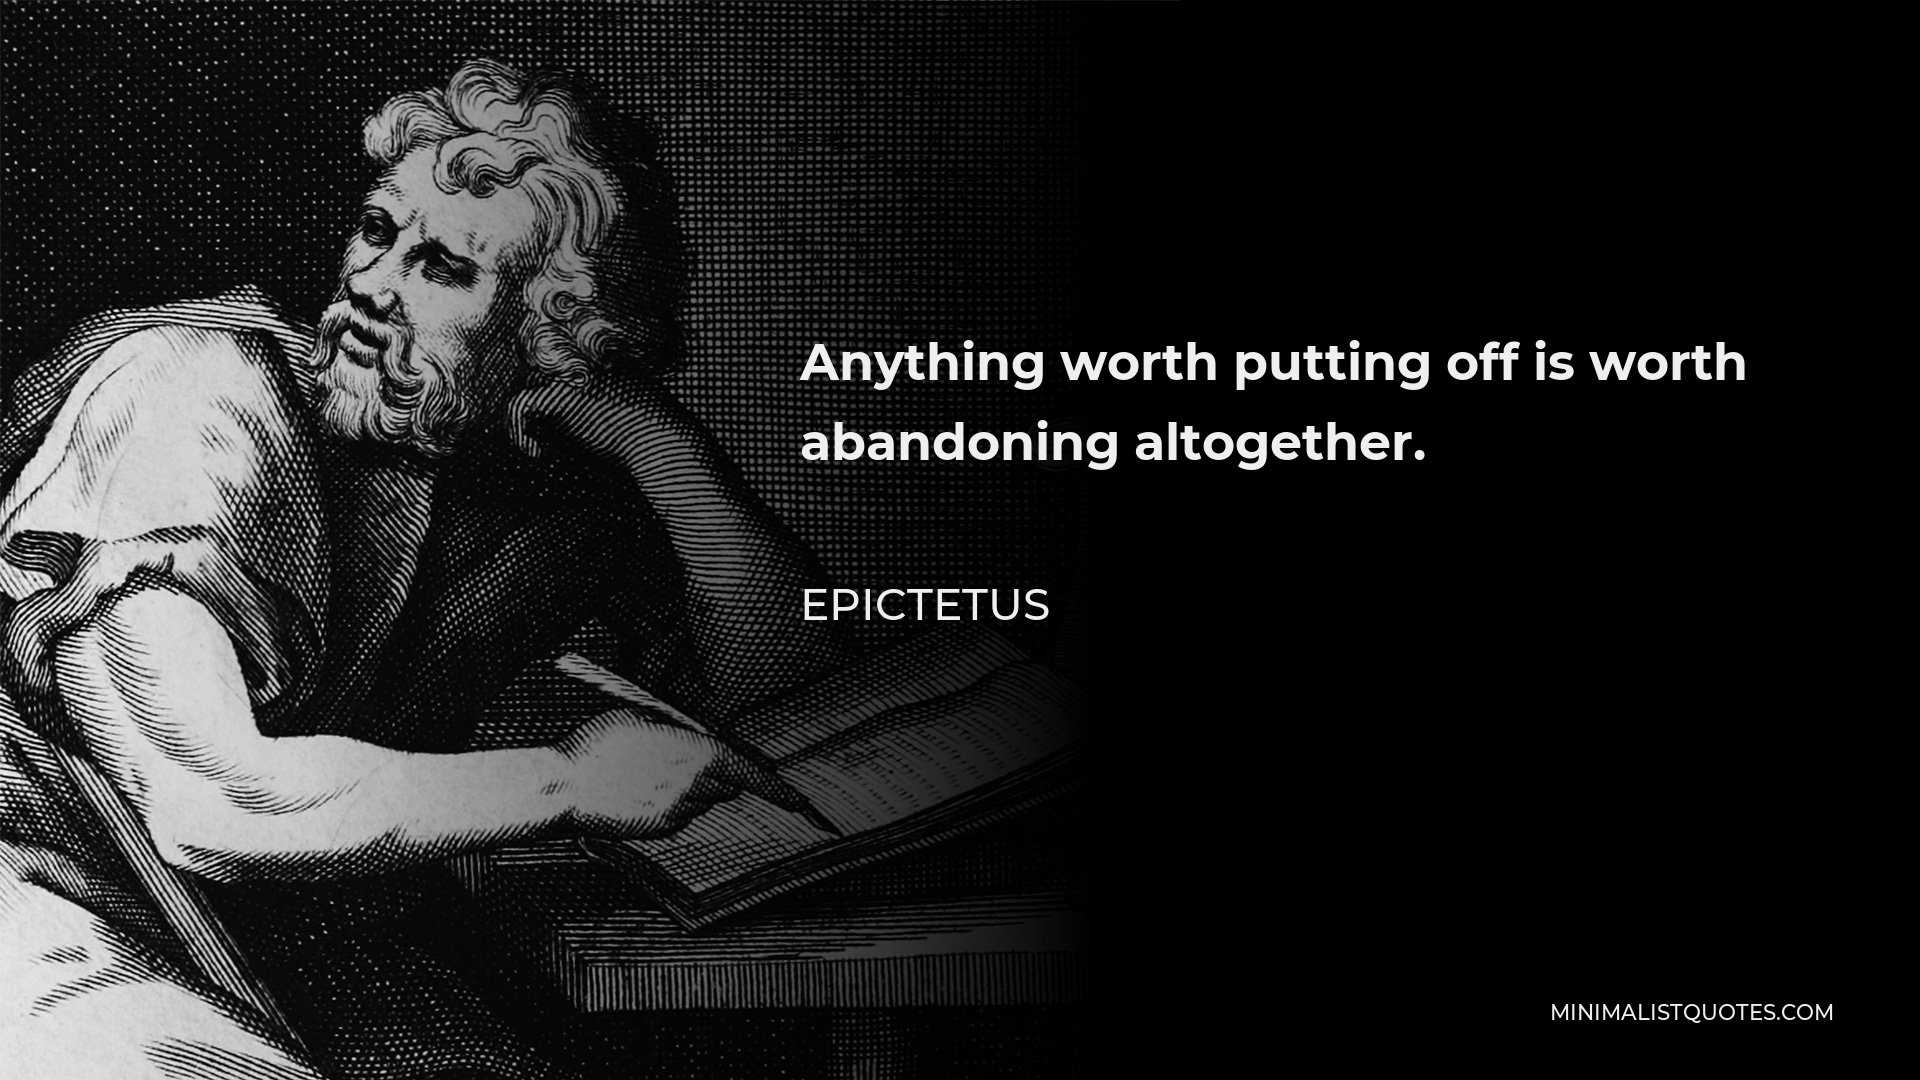 Epictetus Quote - Anything worth putting off is worth abandoning altogether.